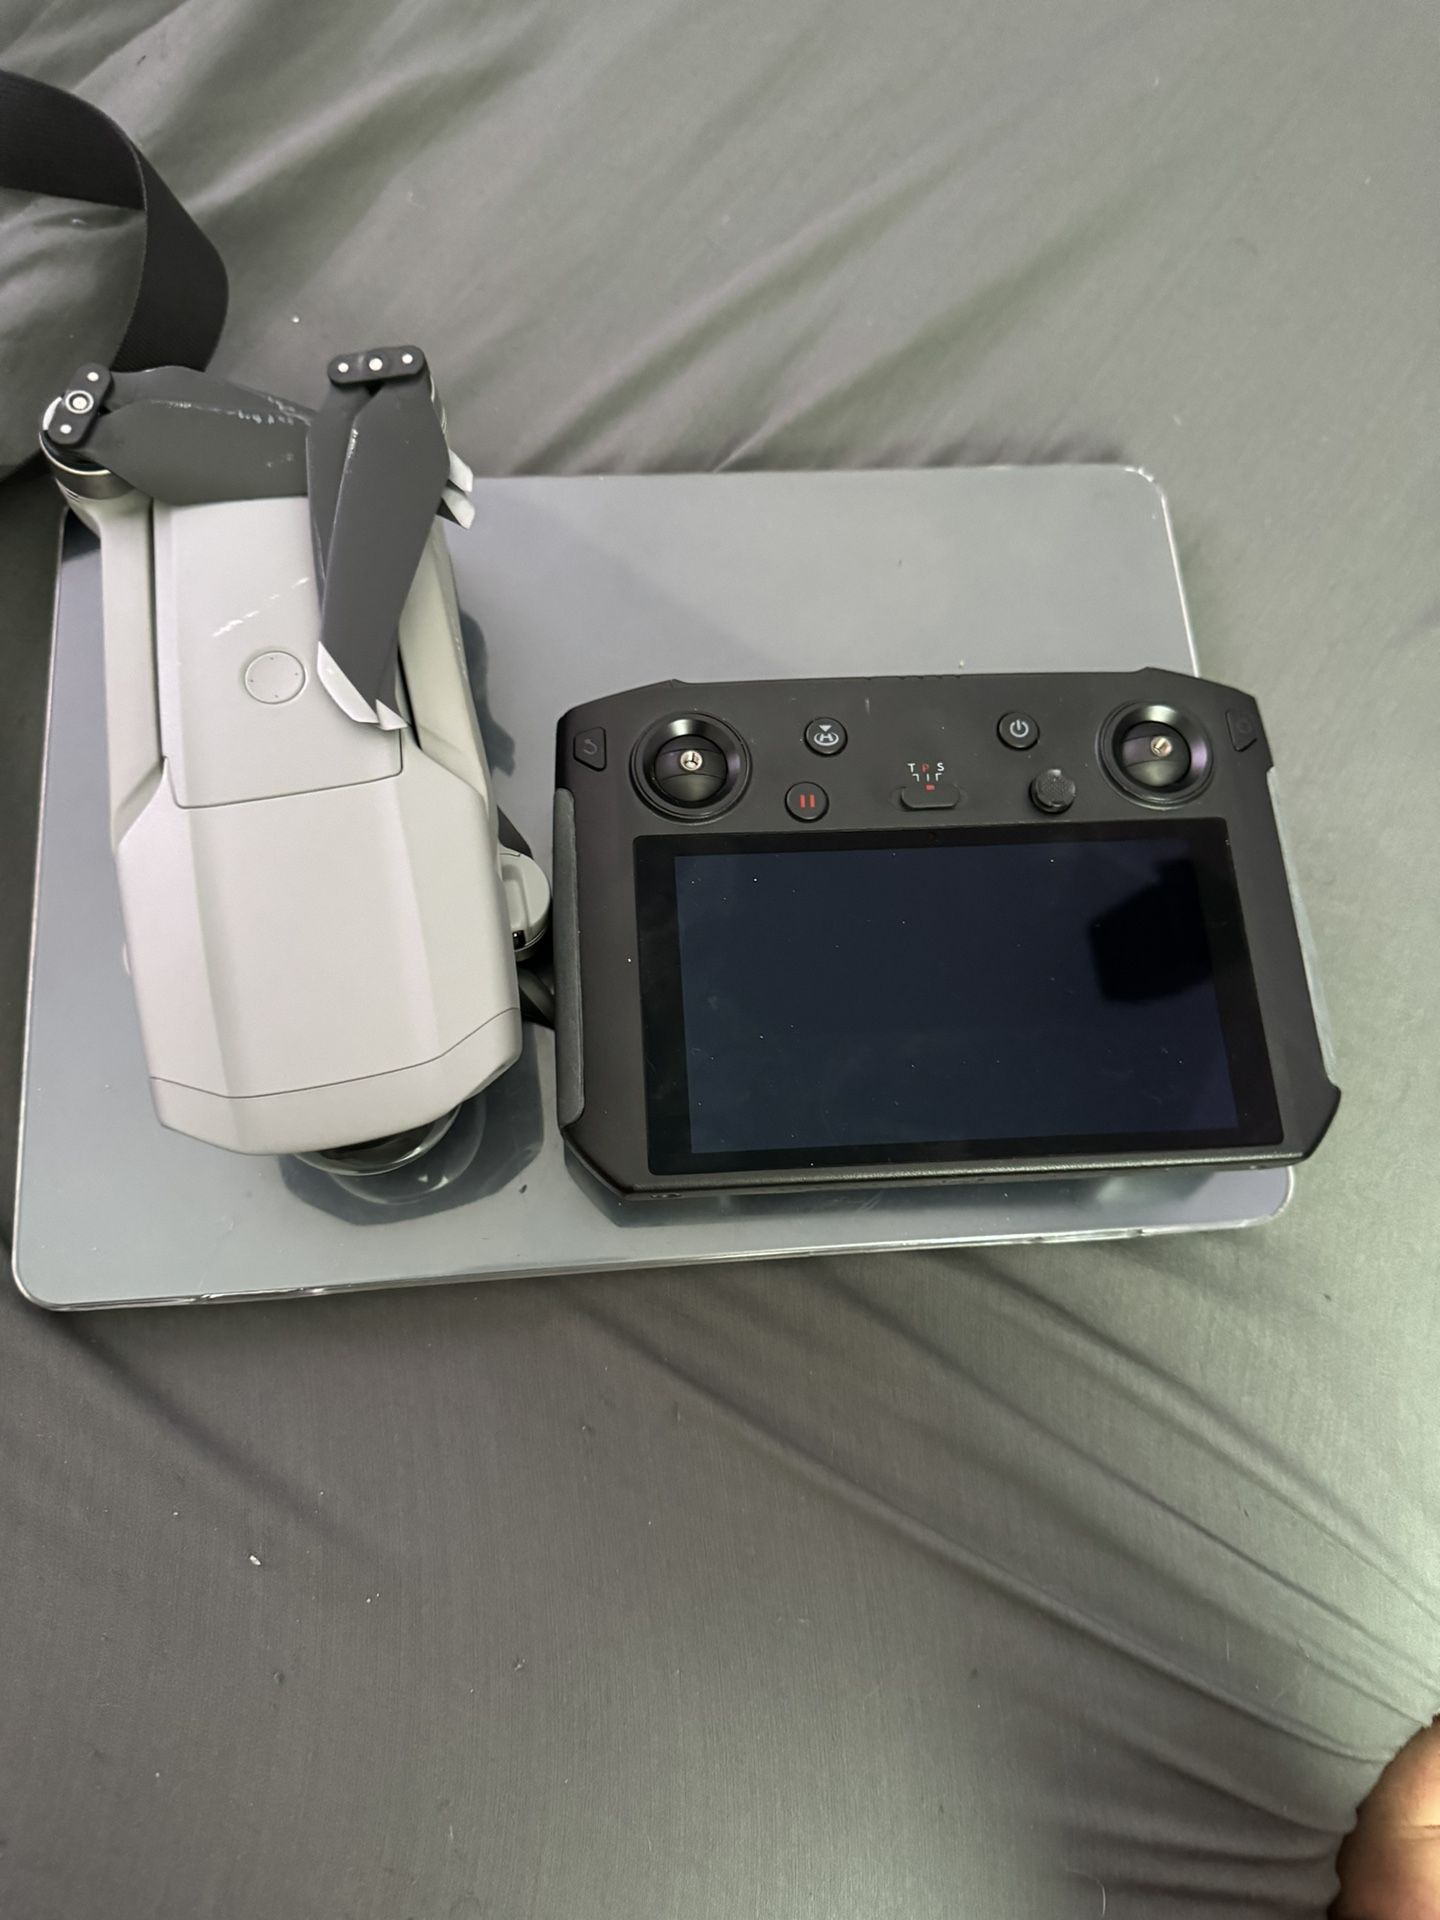 Mavic air 2 with Pro controller (Fly more combo)